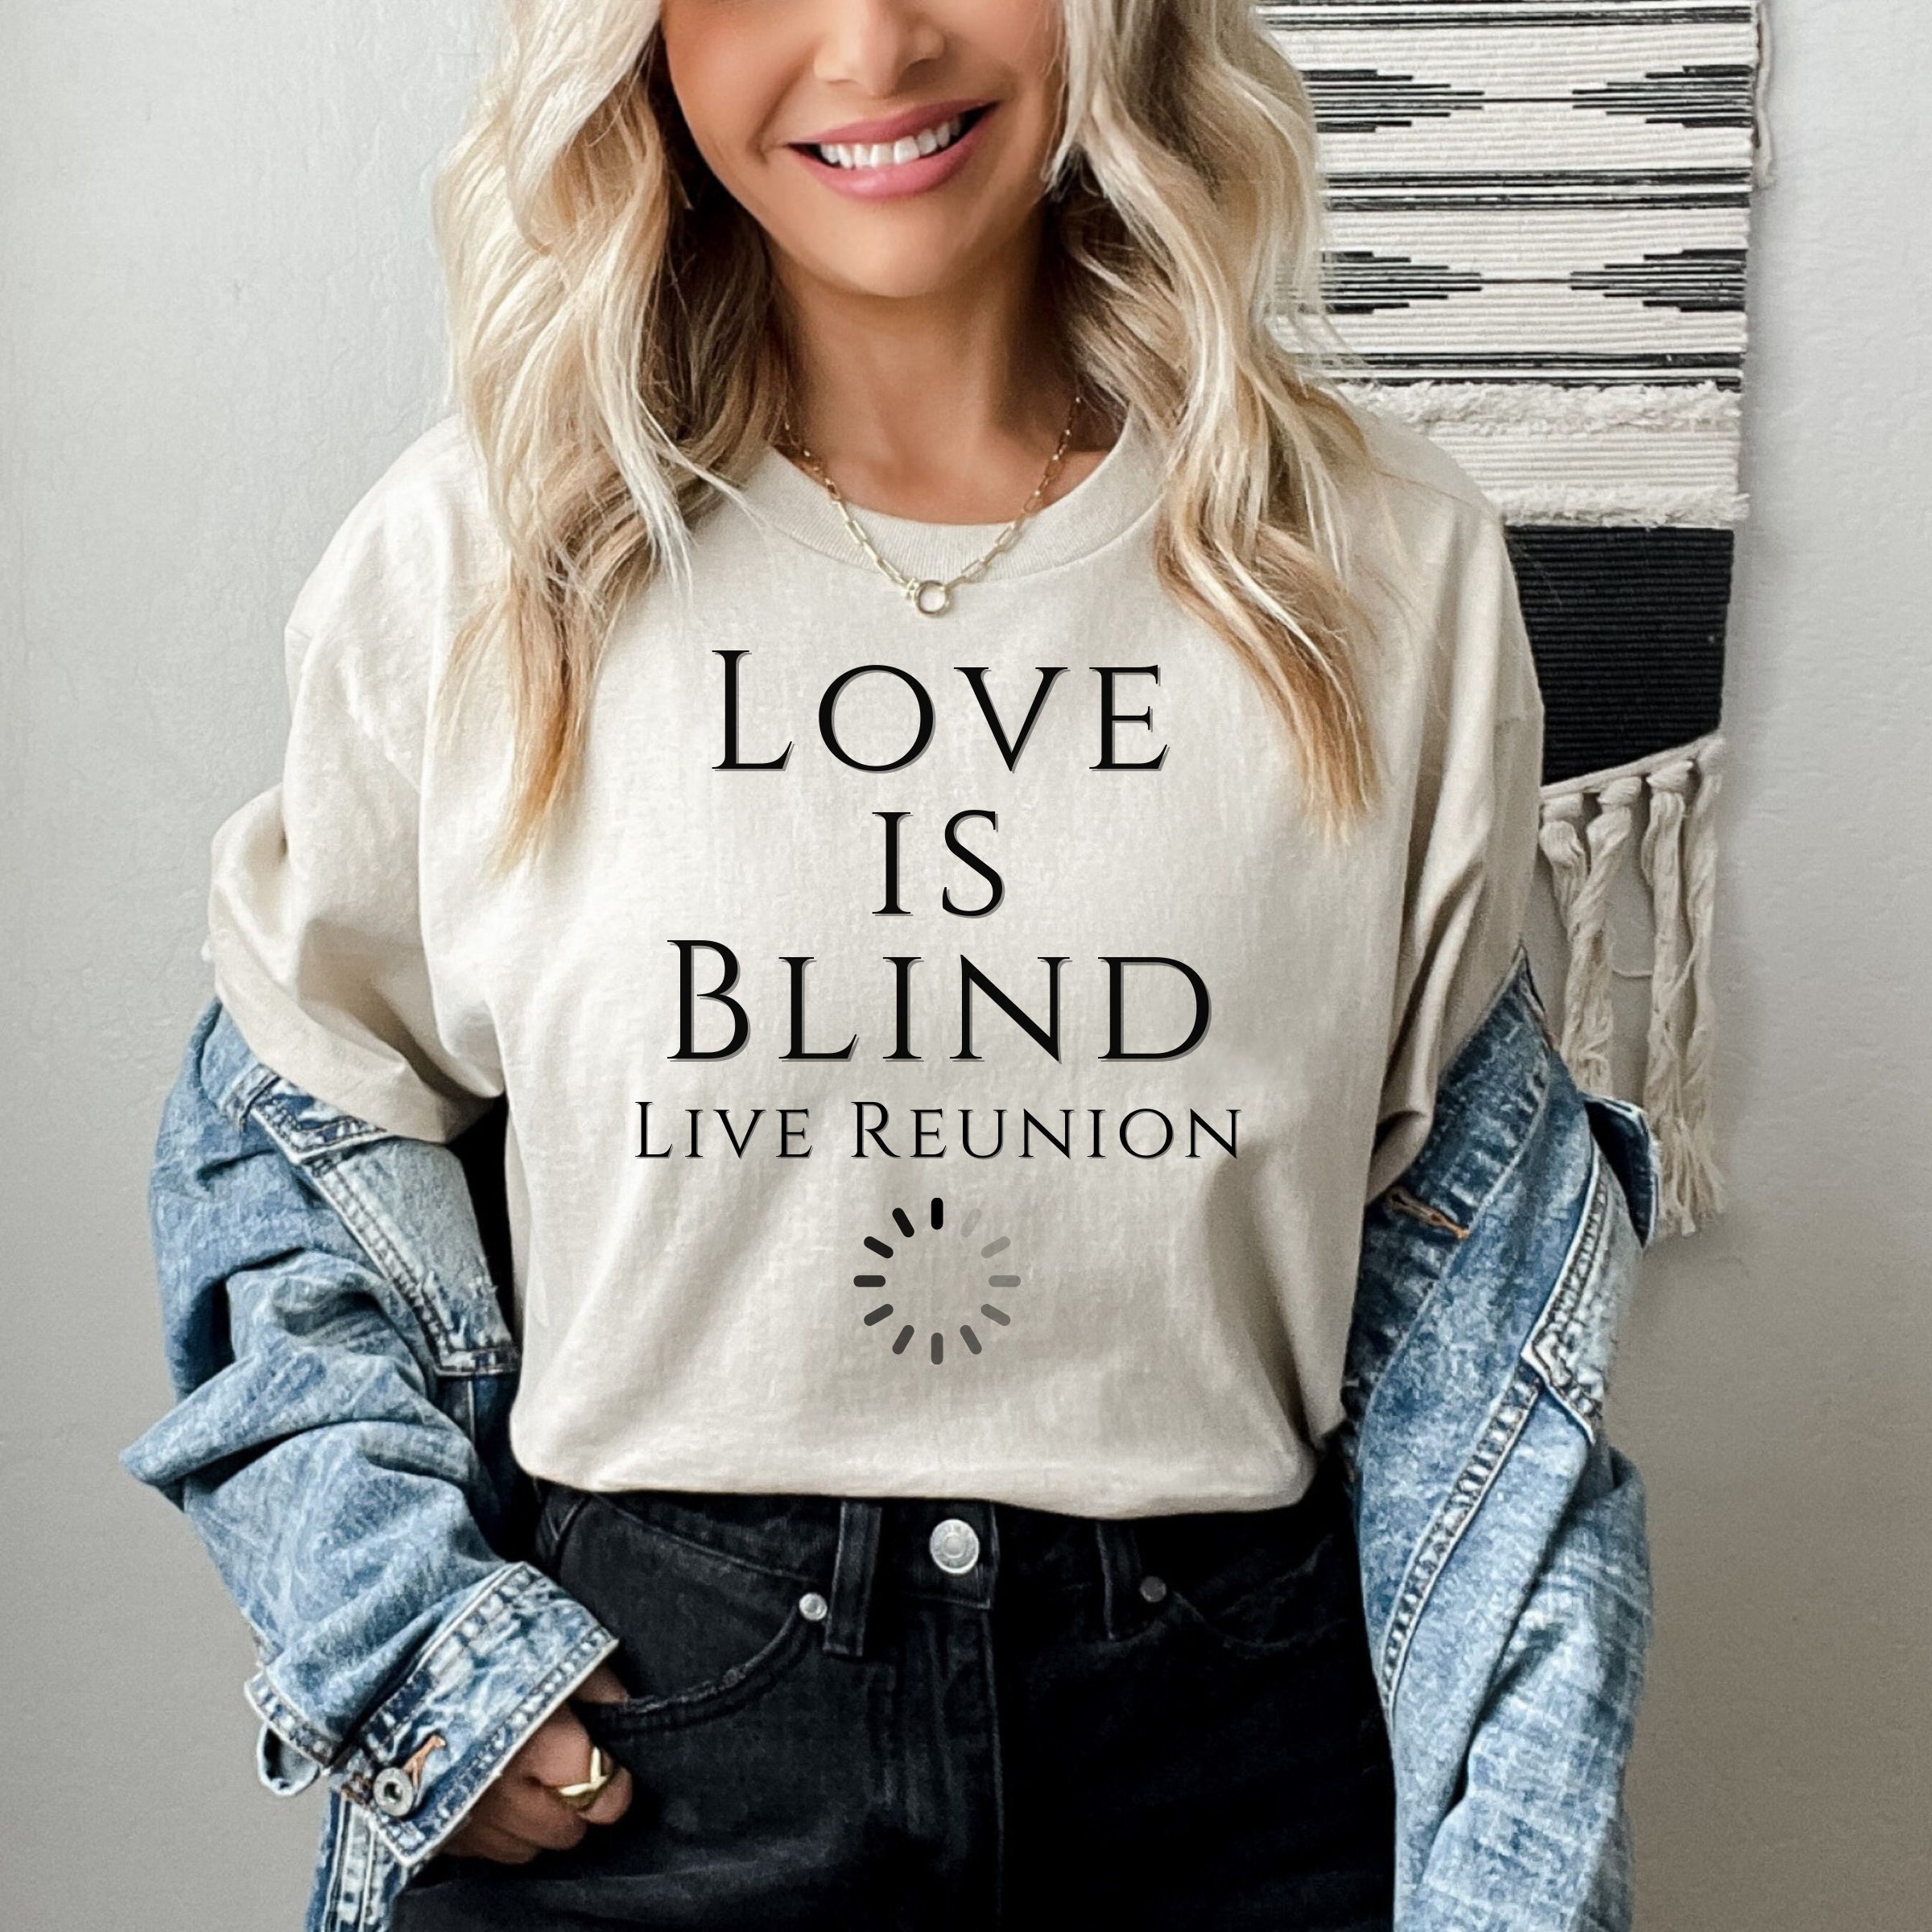 Love Is Blind. Dating Makes Me Wish I Was Blind Funny Single Premium T-Shirt